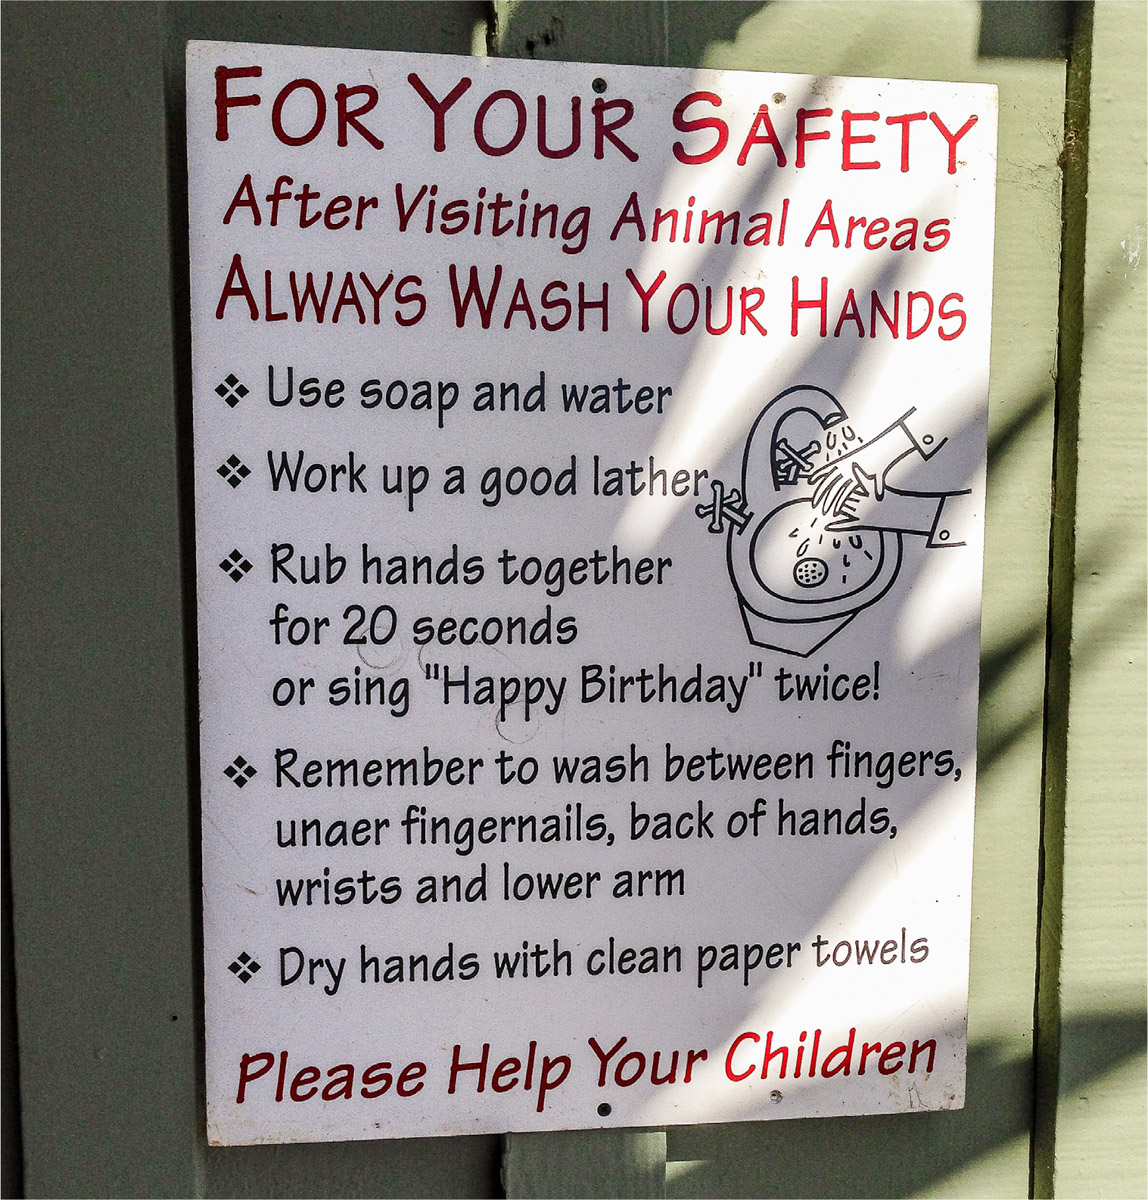 Example of handwashing signage at the California county fairs included in this study. Photo: Melissa T. Ibarra.